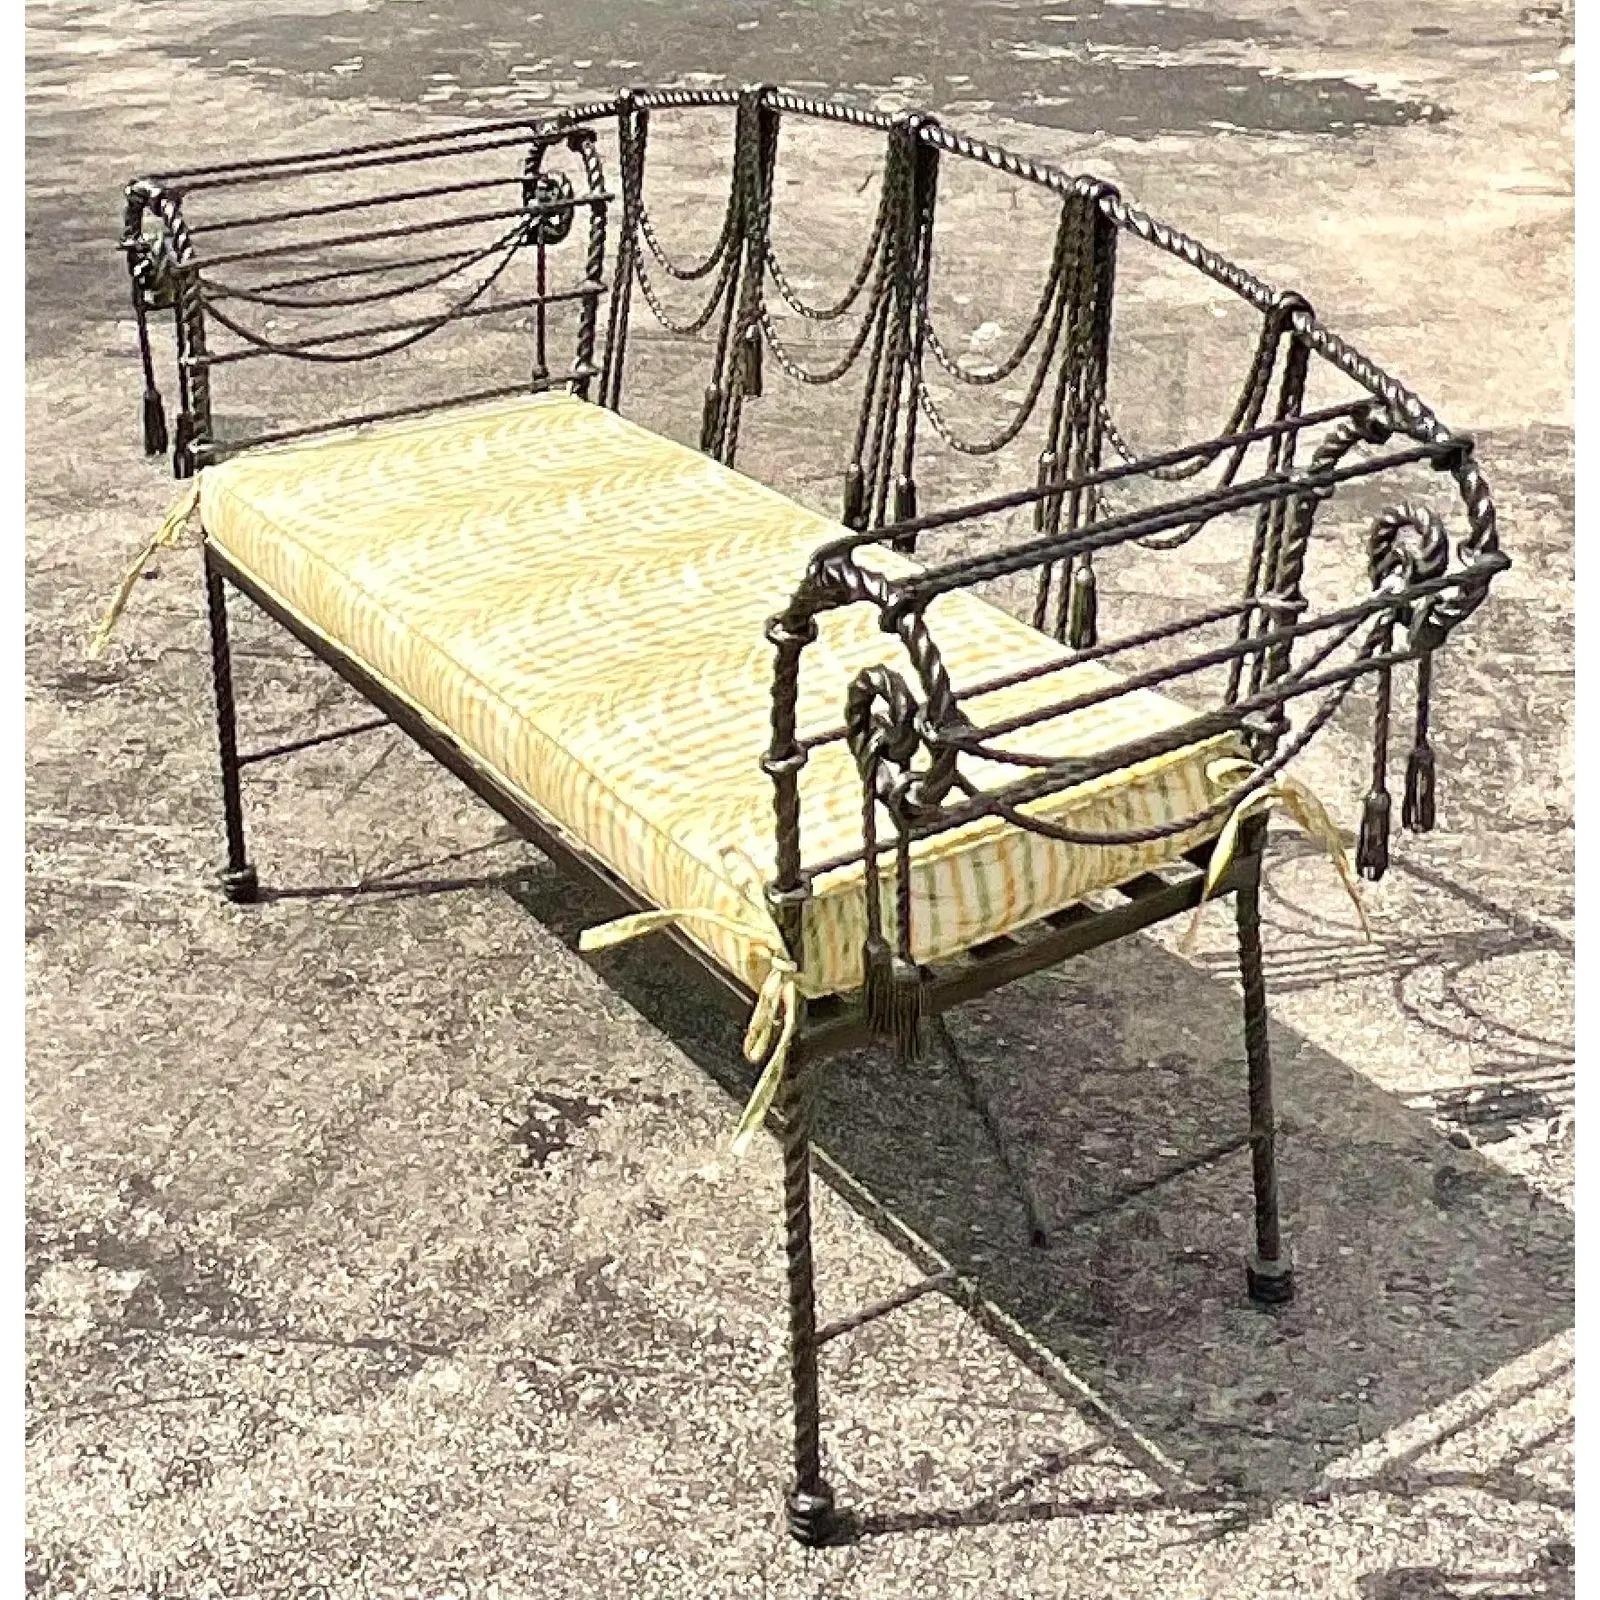 Incredible vintage Regency Swag and Tassel bench. Made by the iconic Maitland Smith group. Beautiful twisted wrought iron with charming rope detail. Stunning custom upholstered seat with a rushed printed cotton sateen. Acquired from a Palm Beach